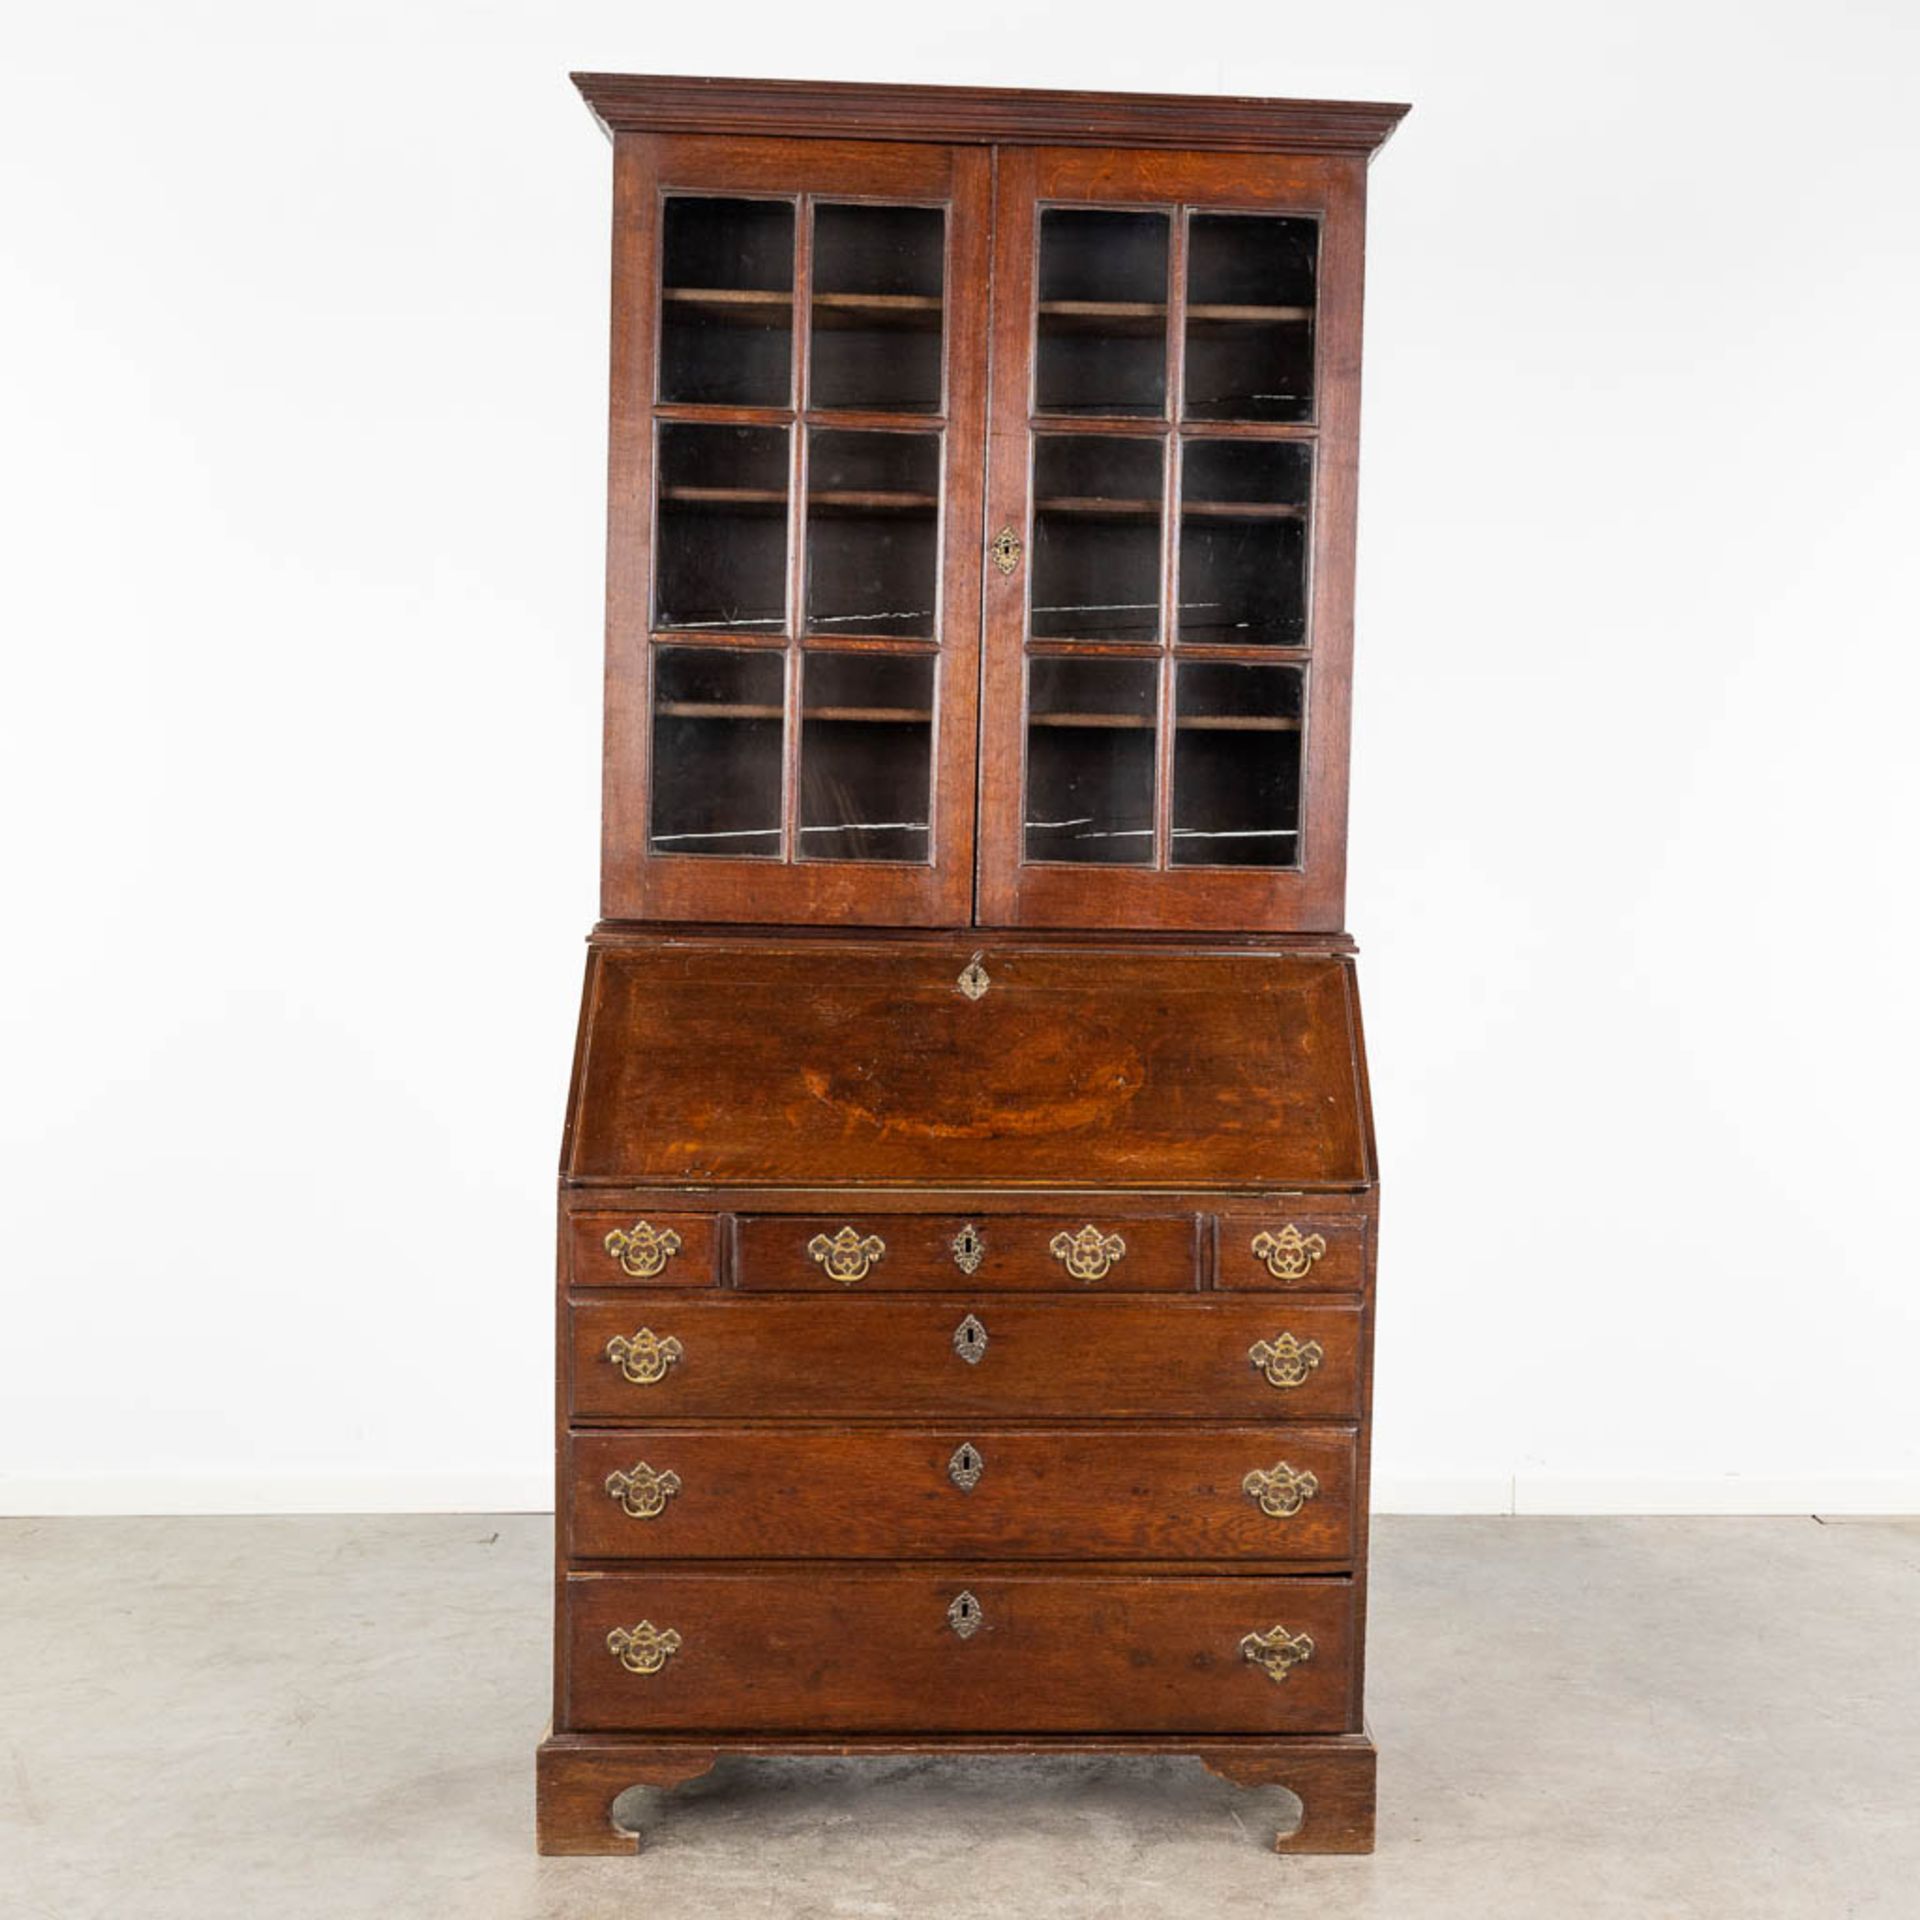 A secretaire with a display cabinet/library, oak, 19th C. (L: 98 x W: 57 x H: 212 cm)